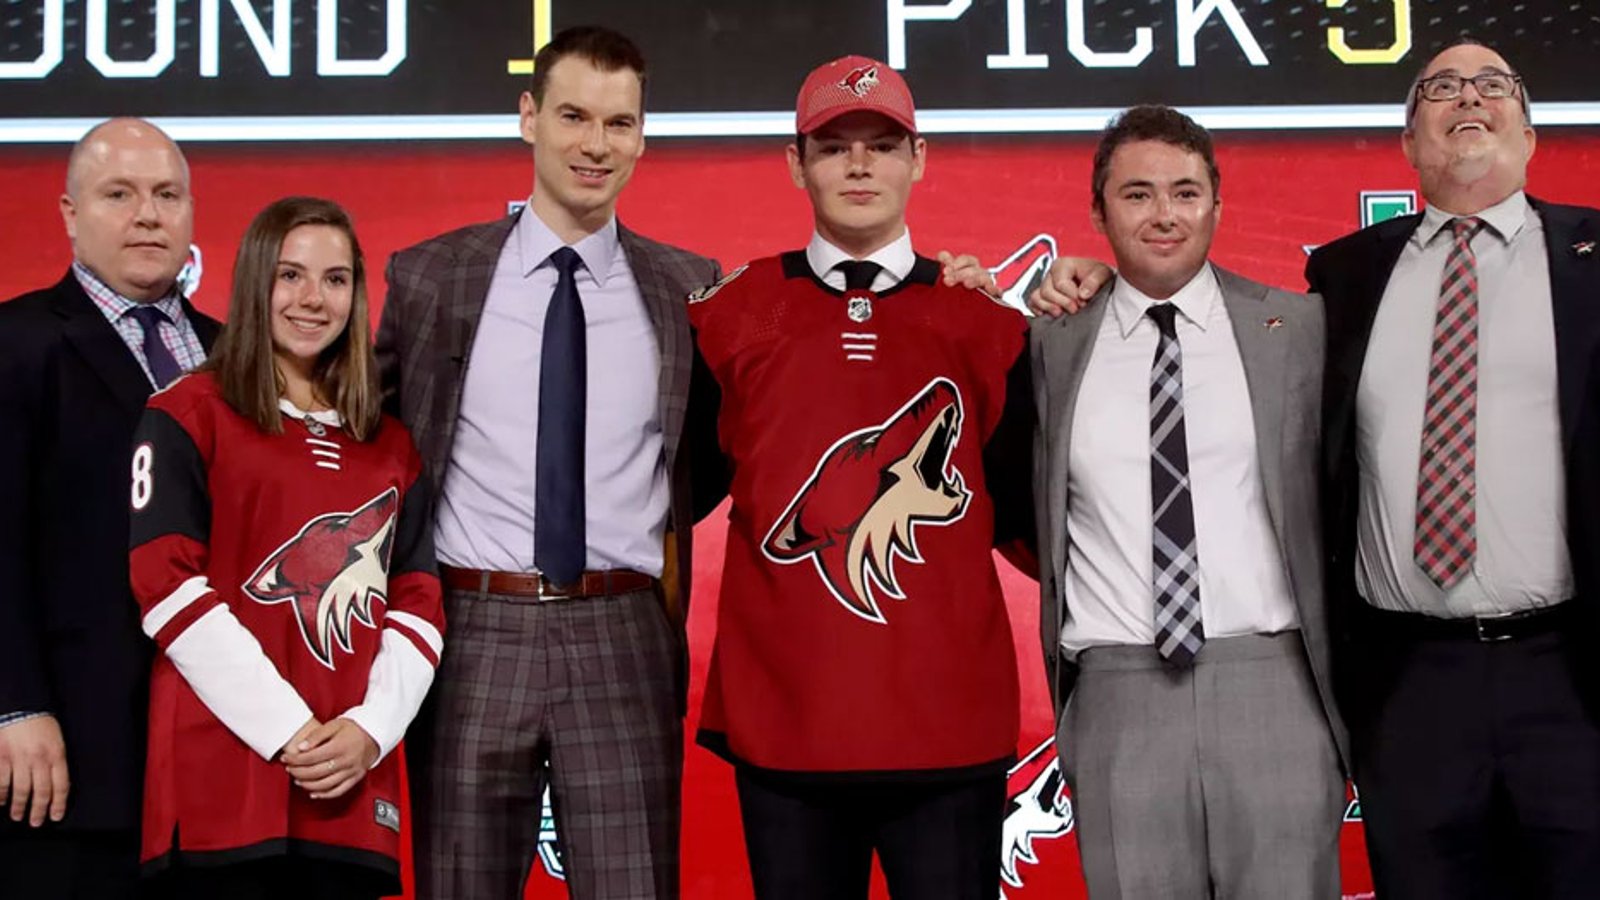 Update: Full details of the NHL's investigation into the Arizona Coyotes